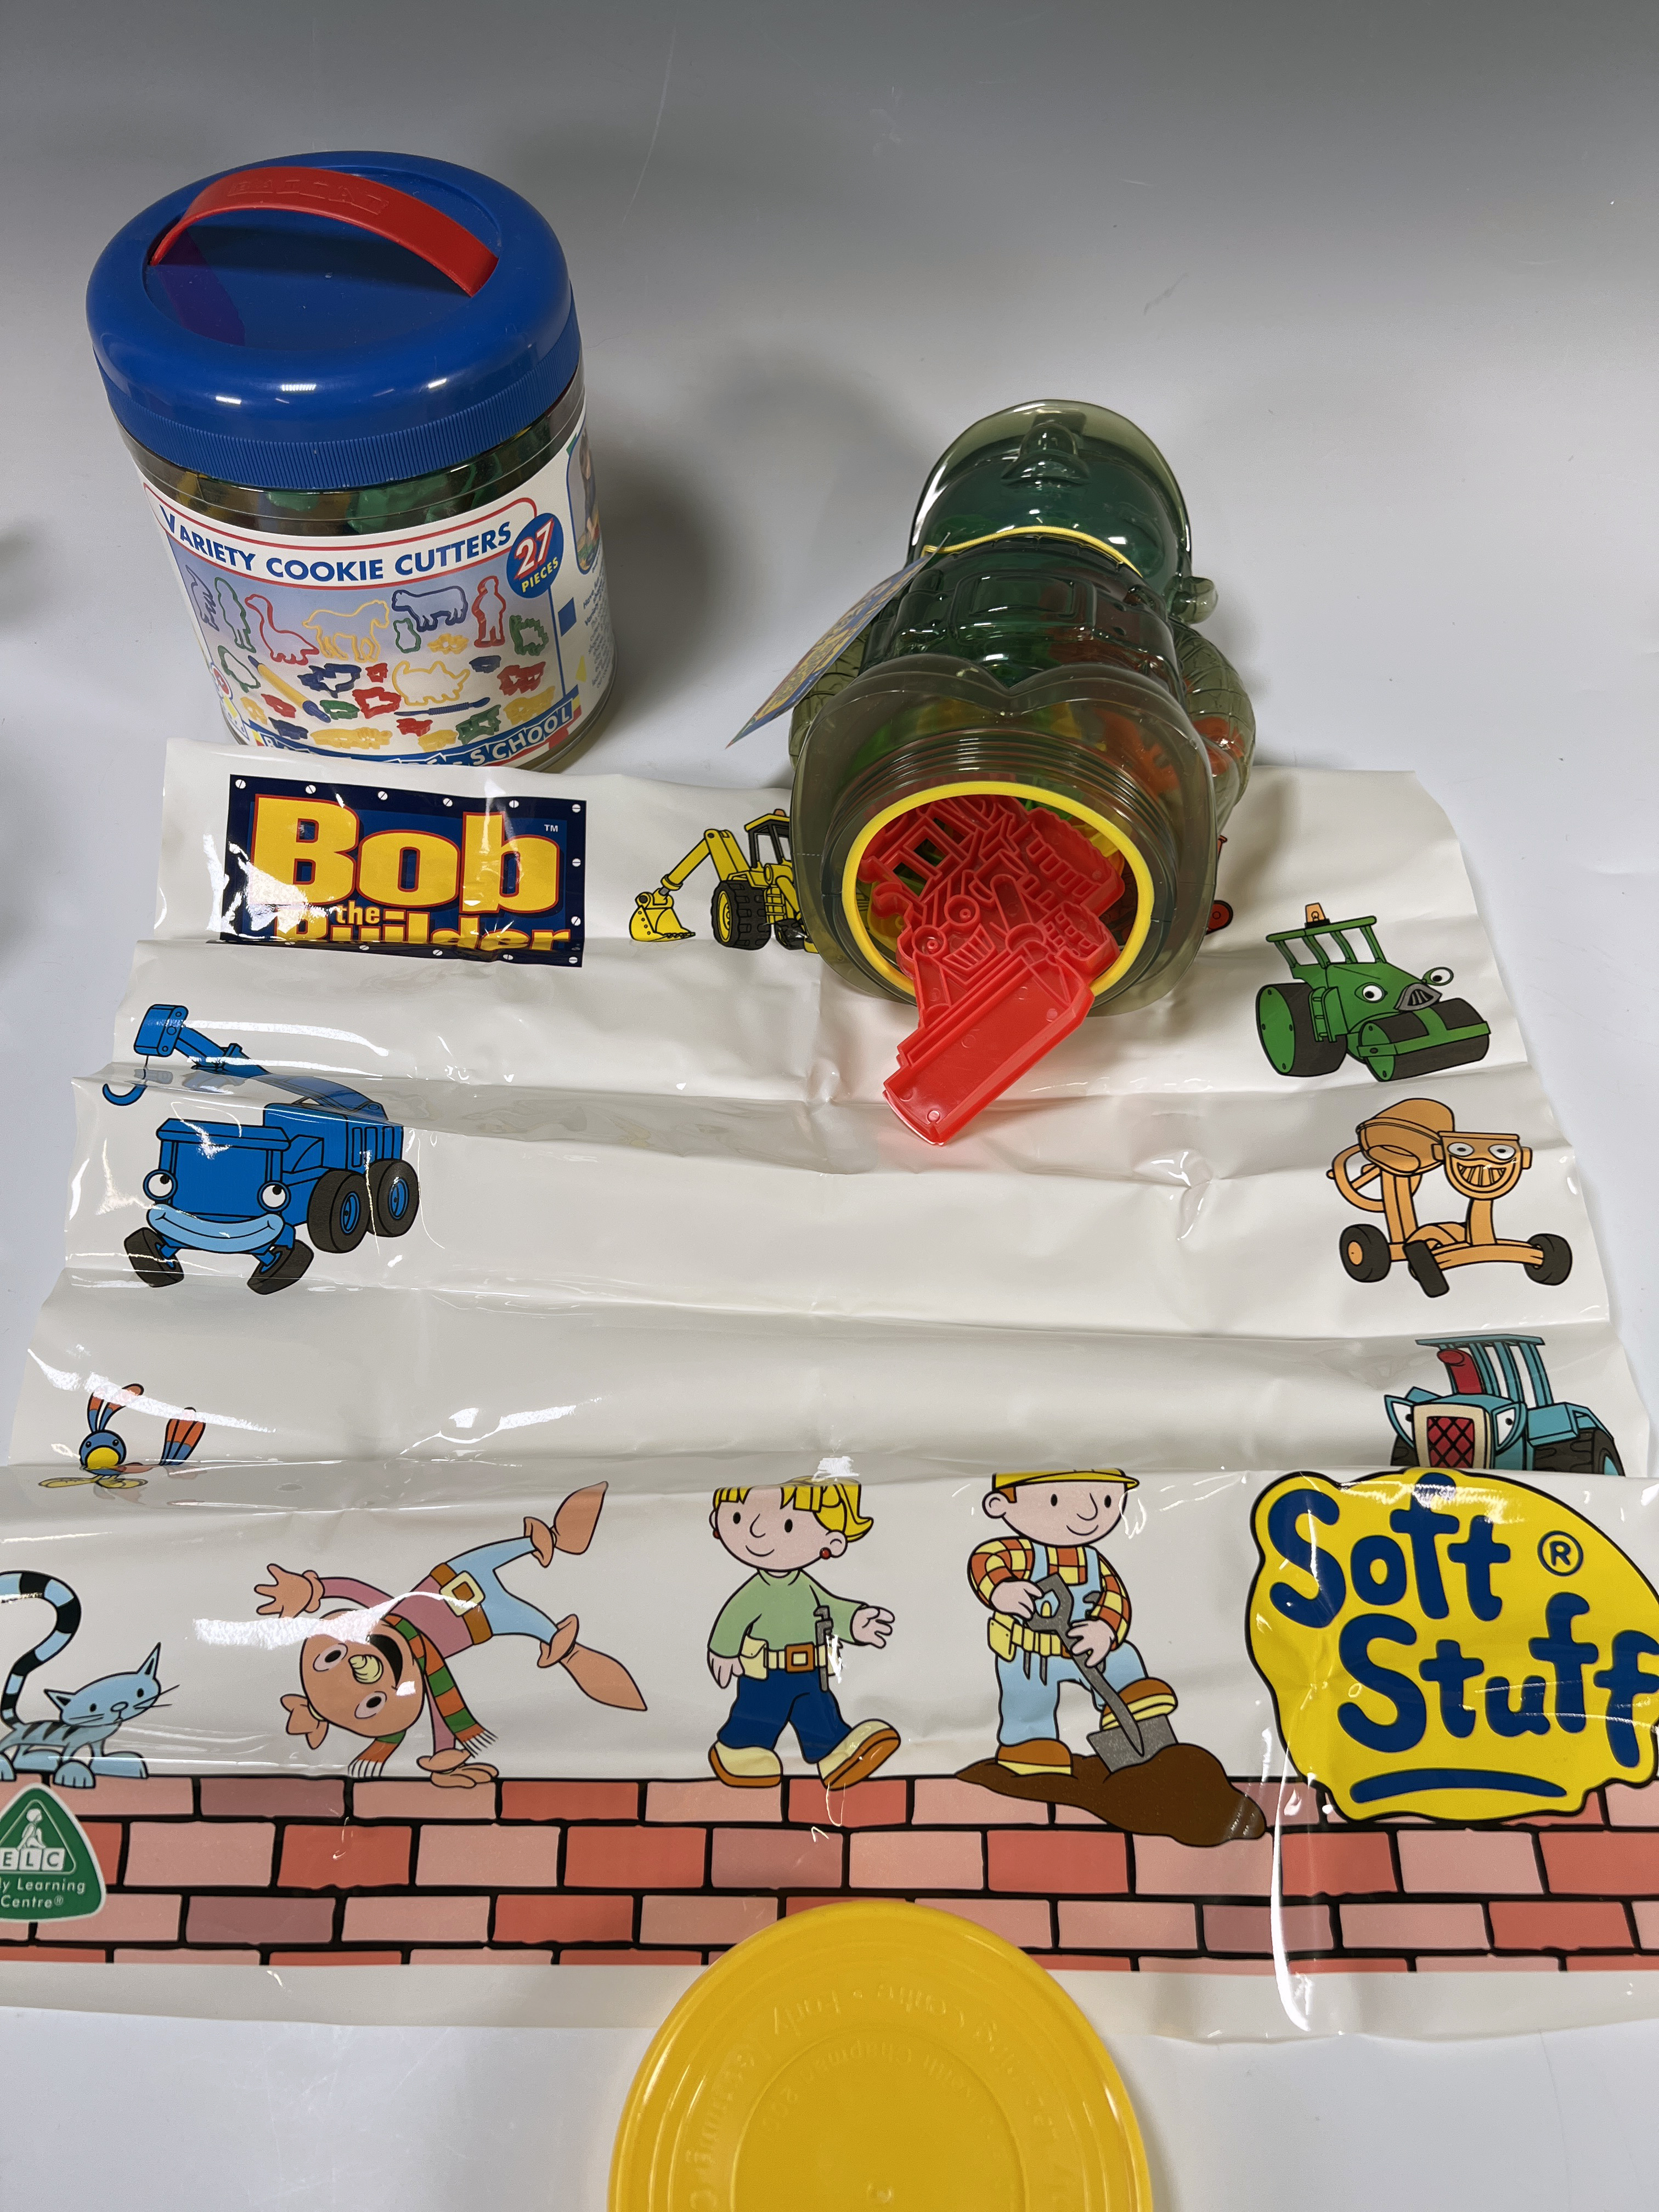 Kids Themed Cookie Cutters, Stamps, Sandwich Cutter Incl Bob The Builder image 2